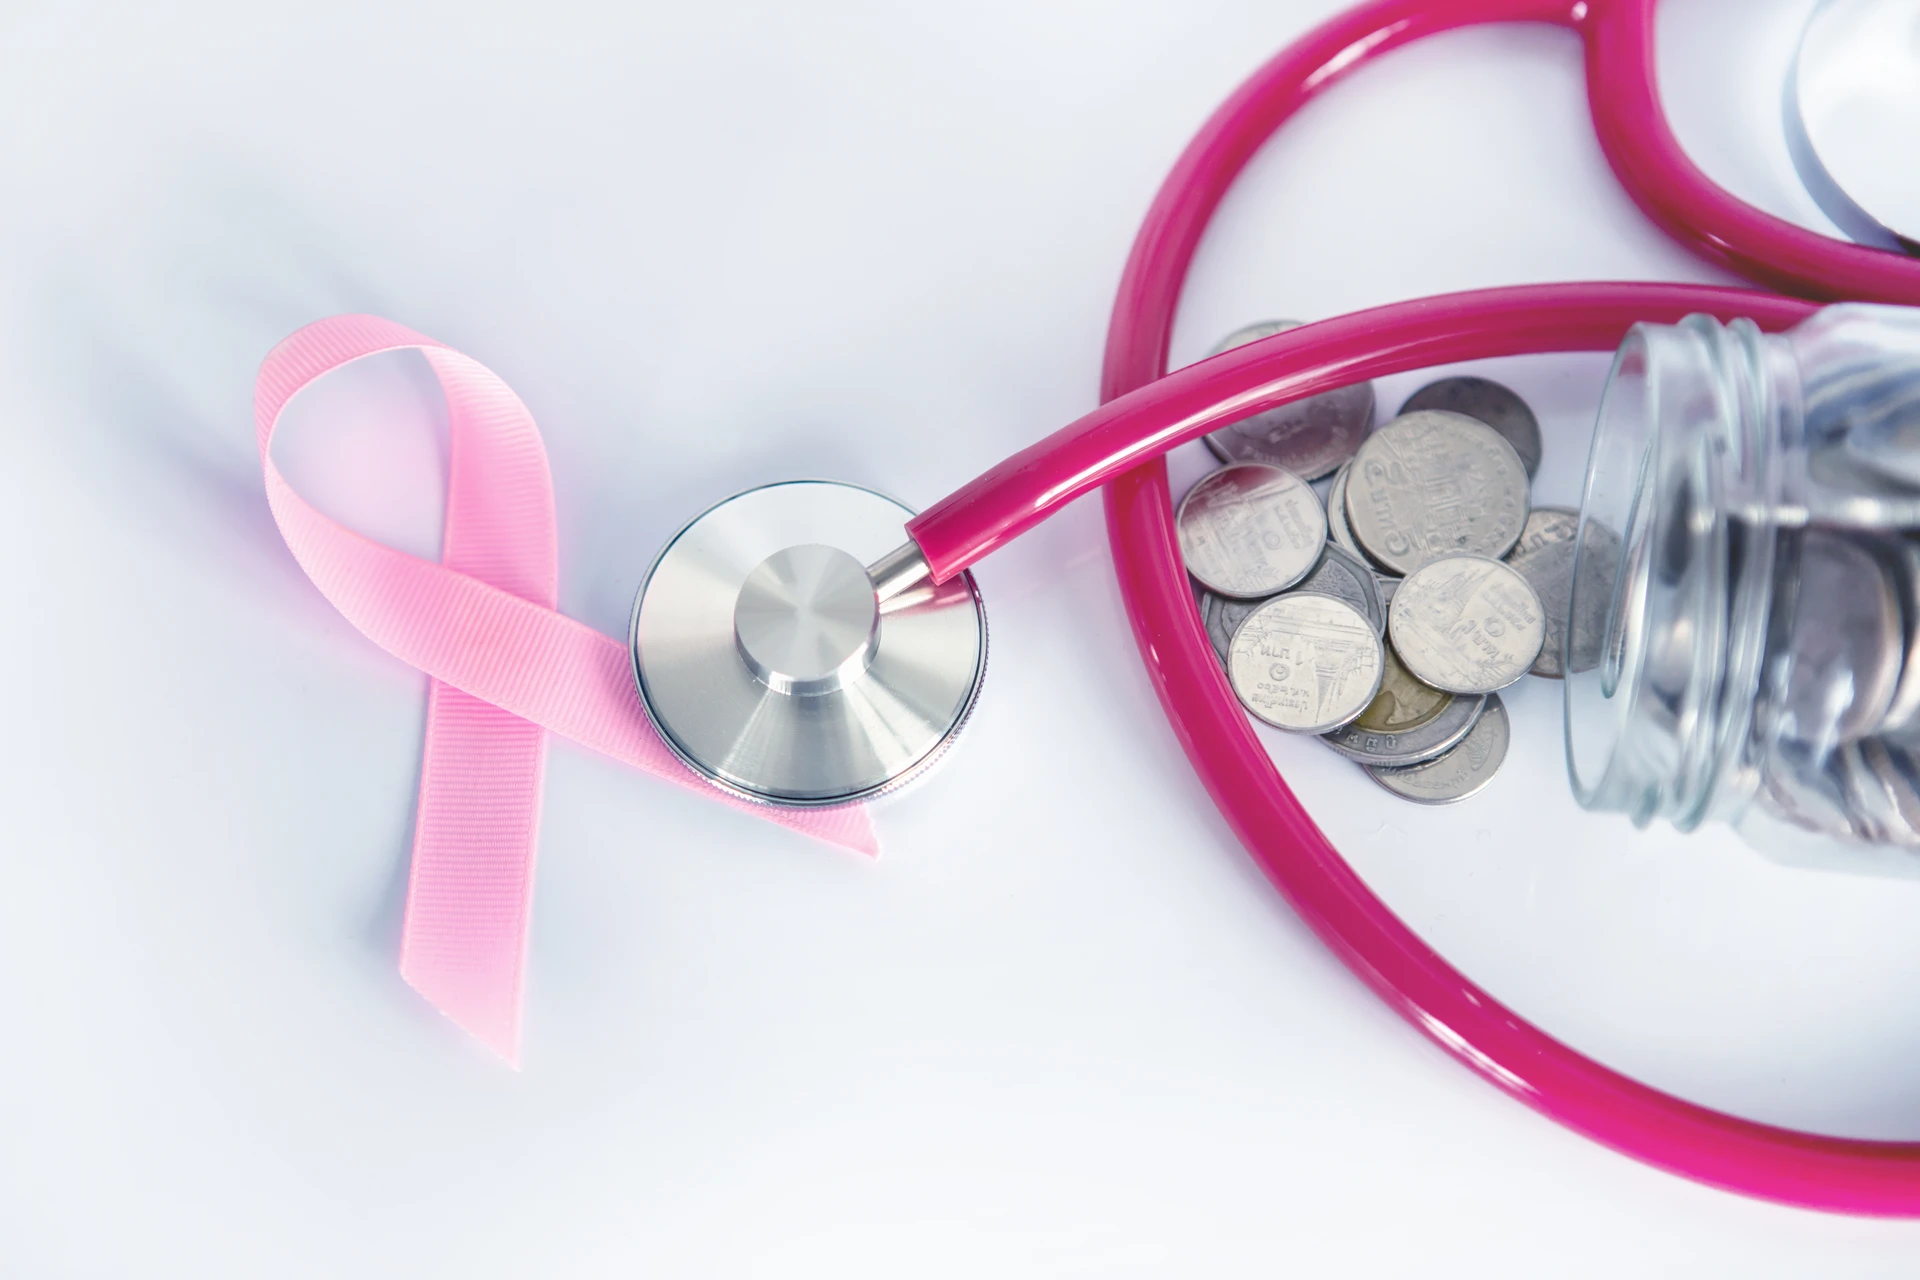 Cancer treatment costs